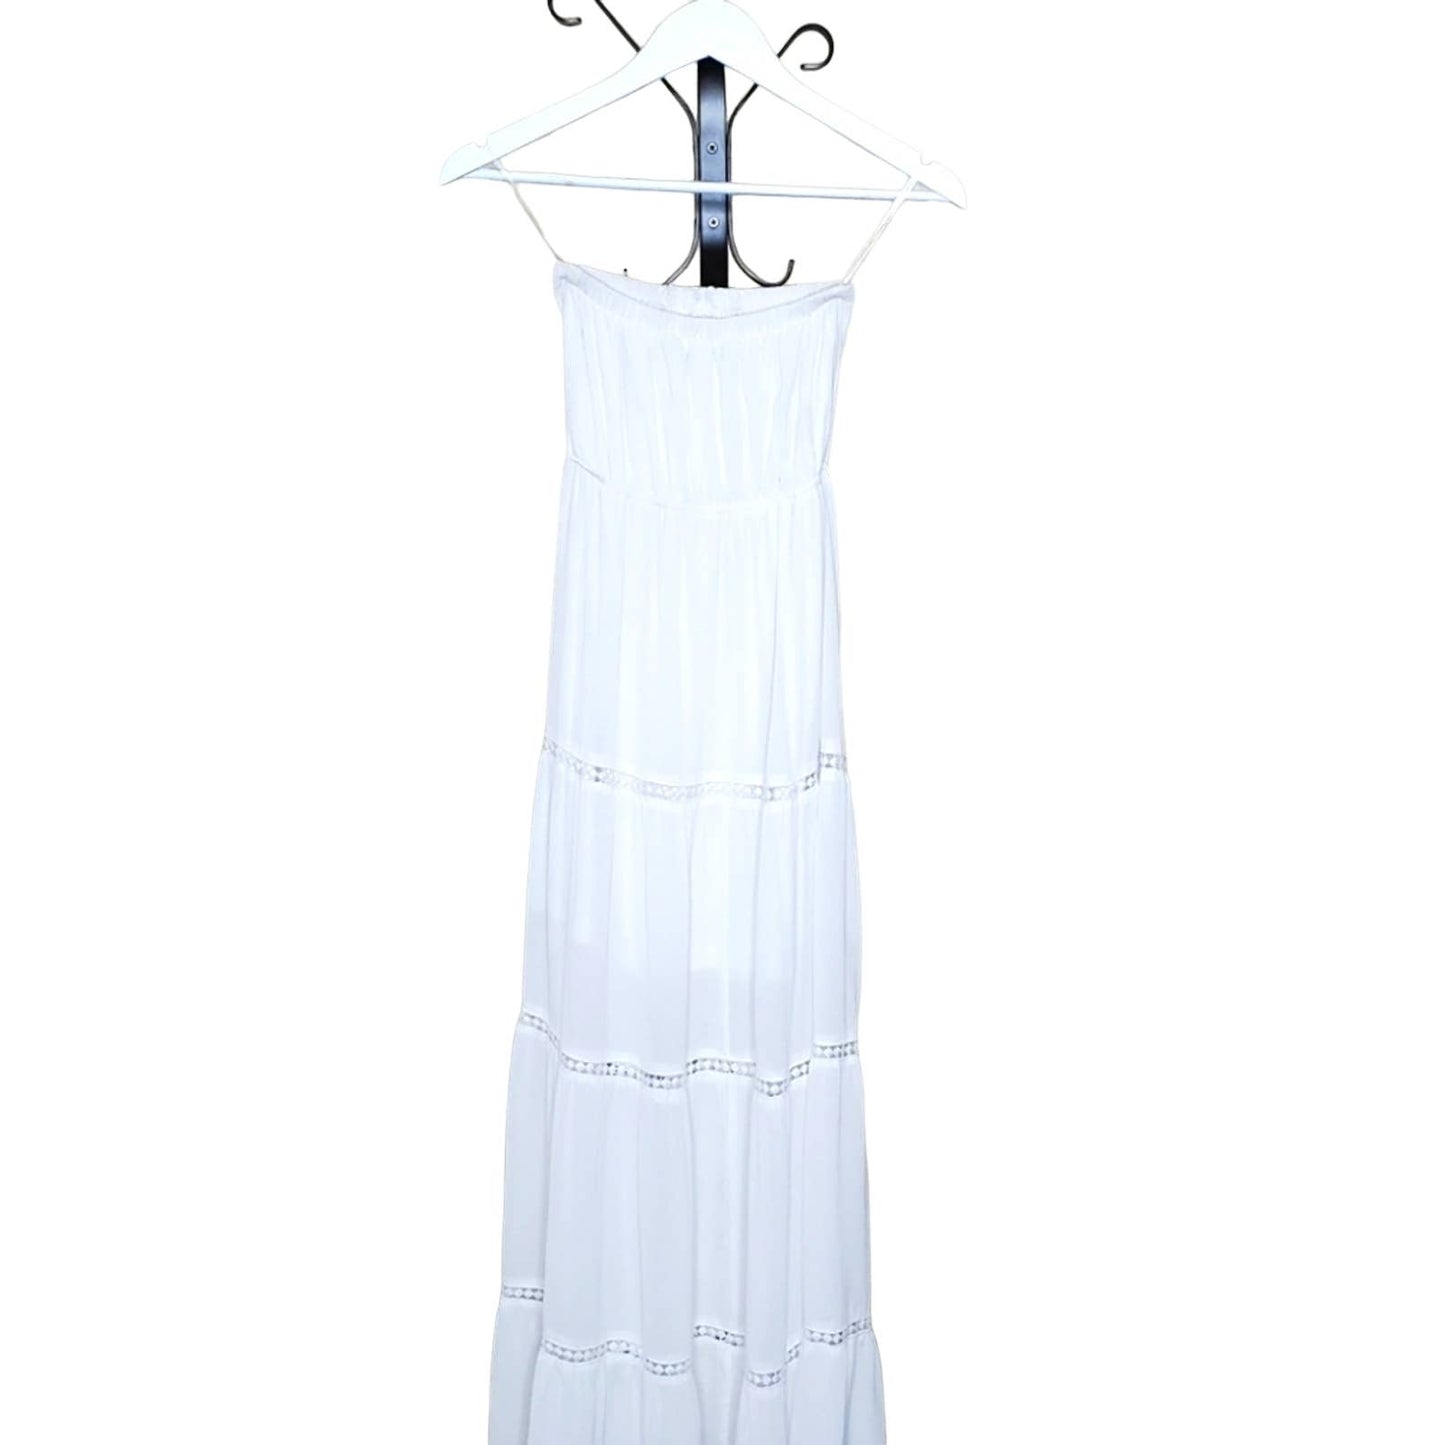 PARISIAN Strapless Long White Dress with Sleeves, Size 2